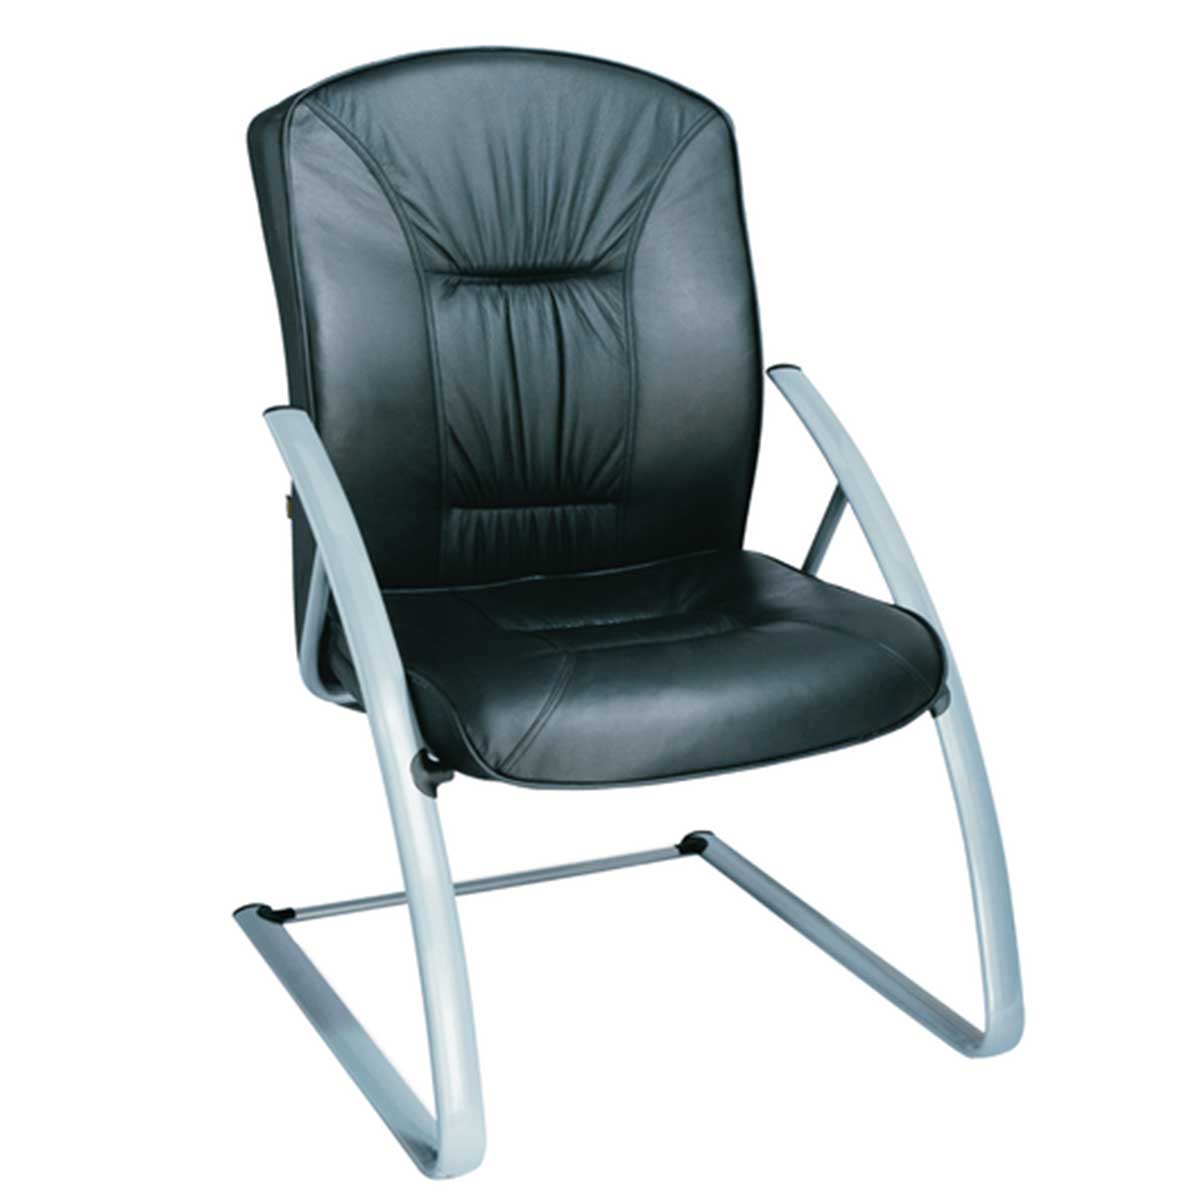 Leather office chair Manufacturers, Suppliers in Connaught Place